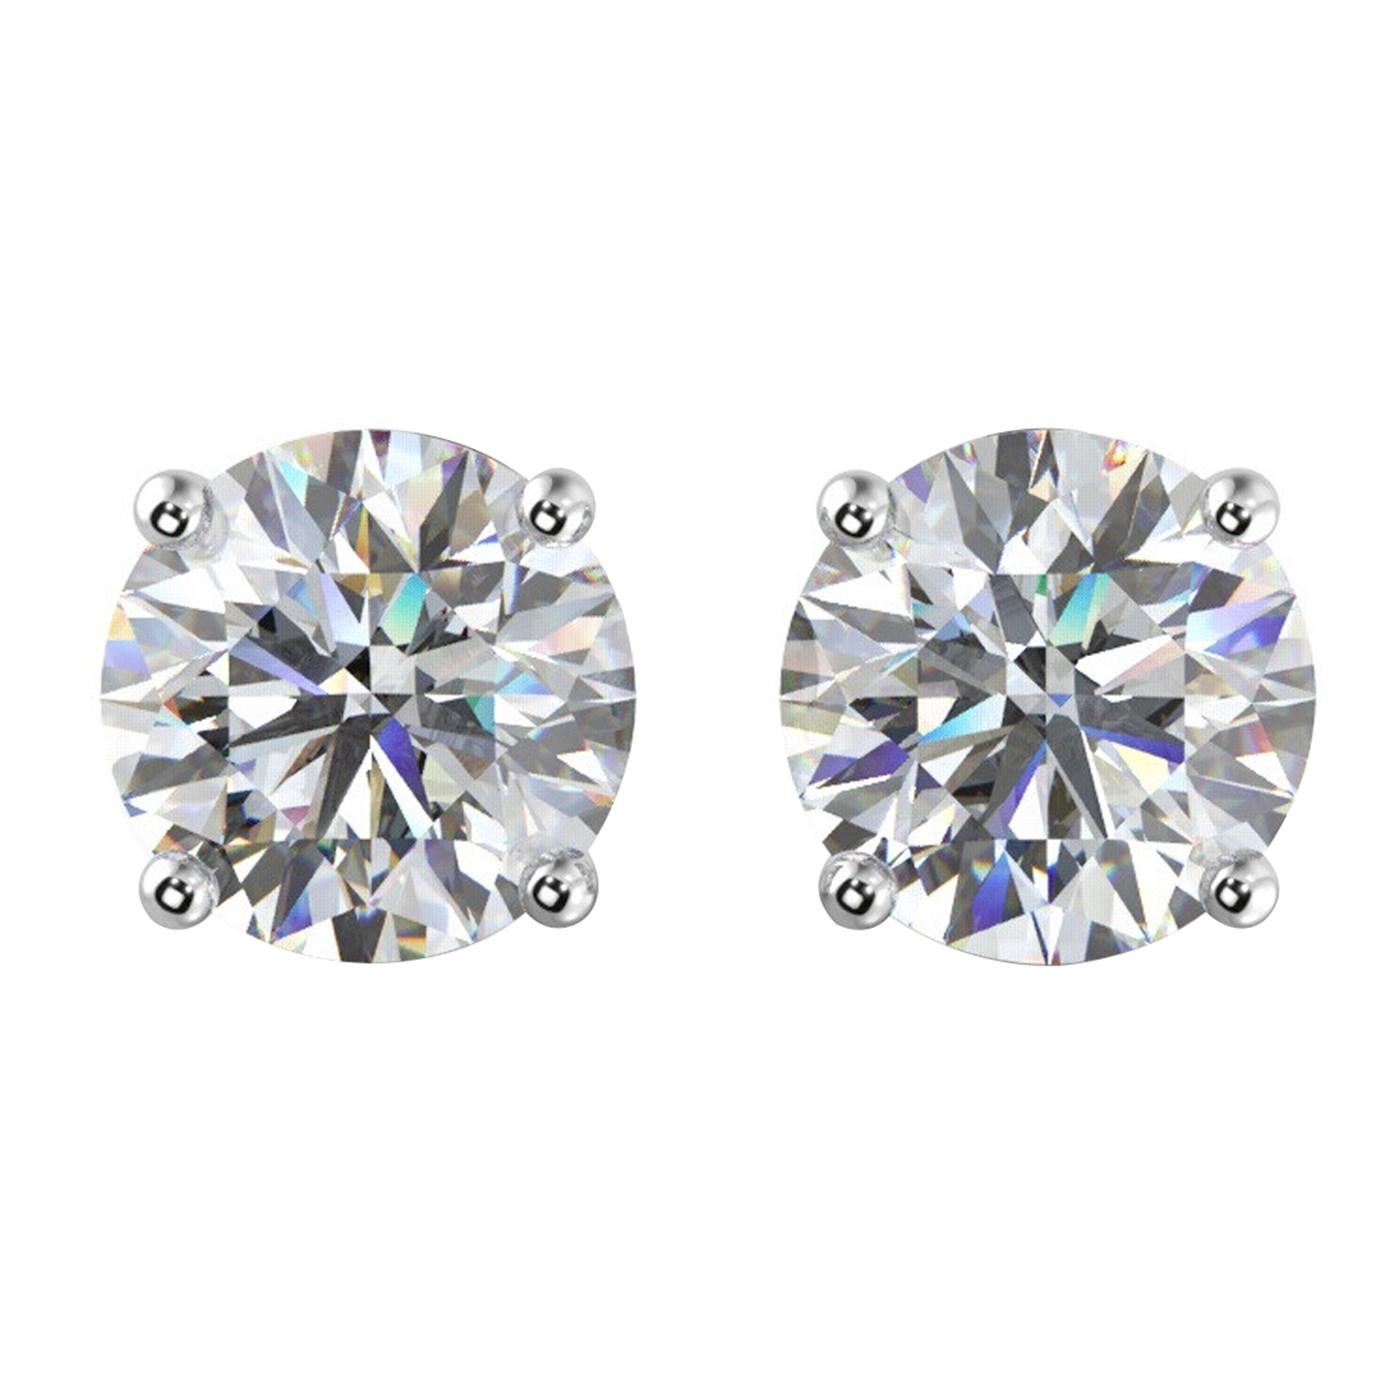 These 4.02ct natural round cut diamond stud earrings are held in a 14K White Gold four-prong setting and are mounted on a tapered basket to get the flush look when worn. Each earring has a push back allowing for greater comfort and fit. Diamond